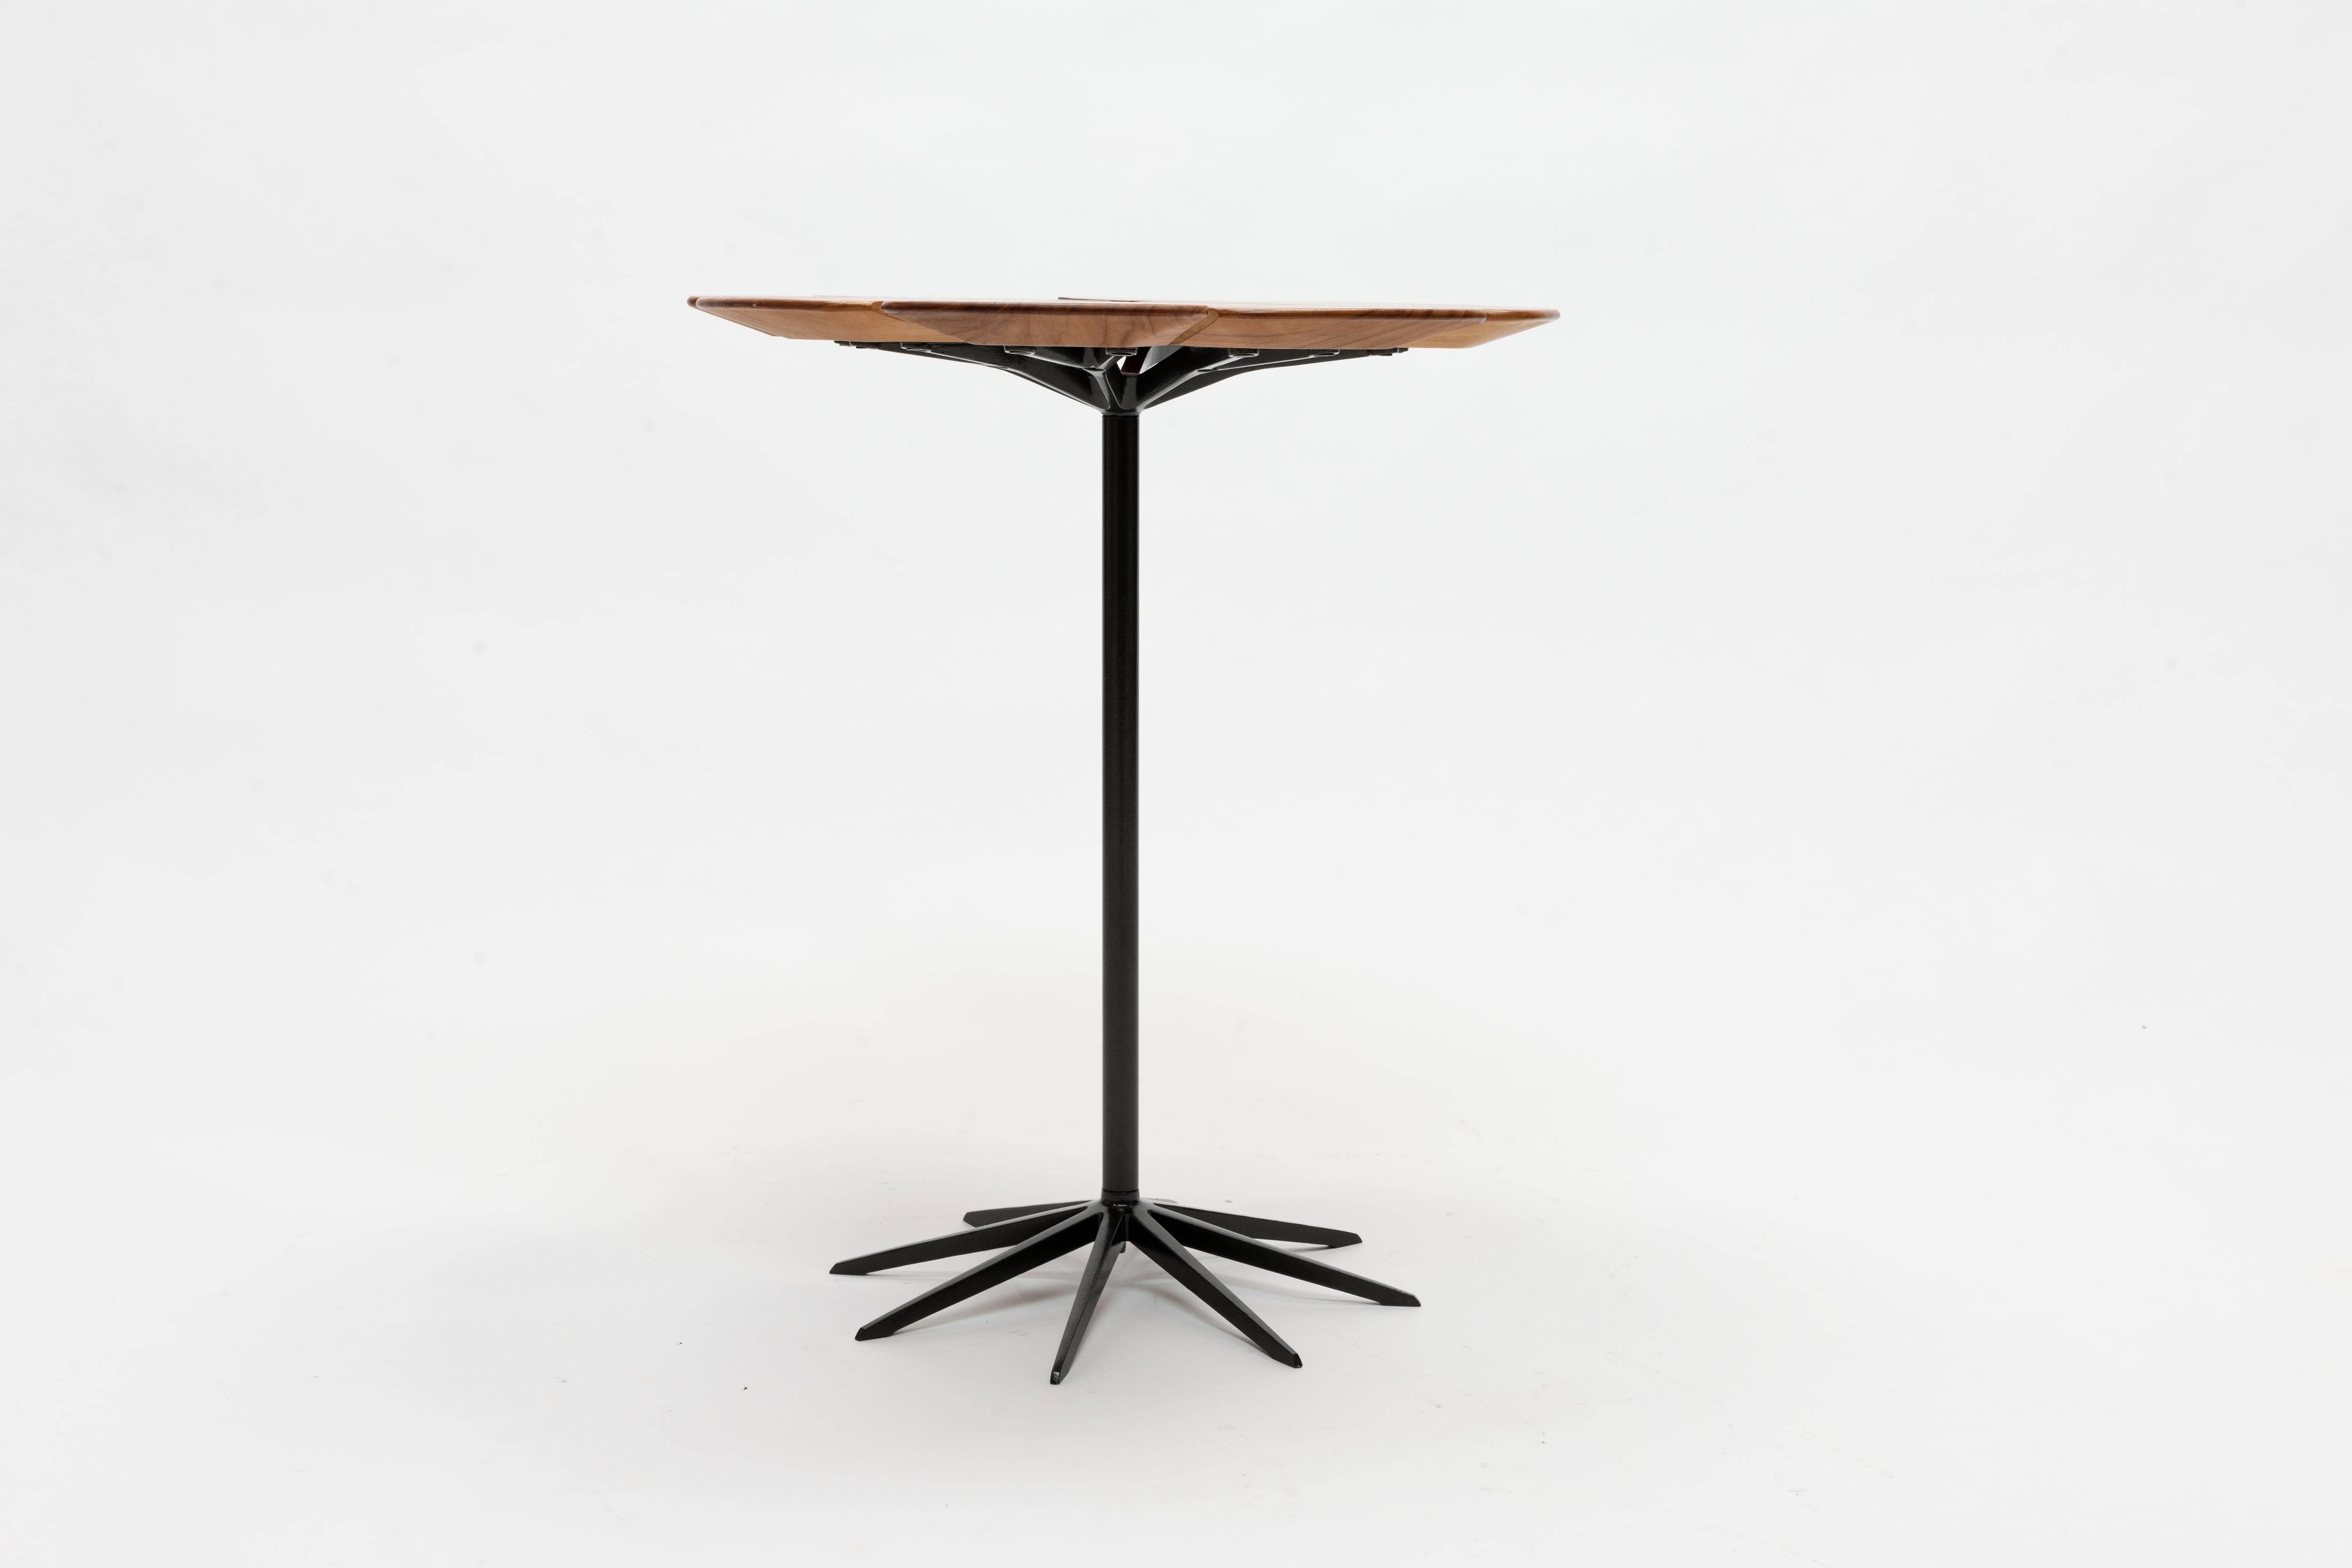 Side or end table with eight individual teak wood “petals”, each supported by its own branch, which stems from the original steel and aluminum base. A whimsical yet highly functional refined design that was originally designed for outdoor purpose